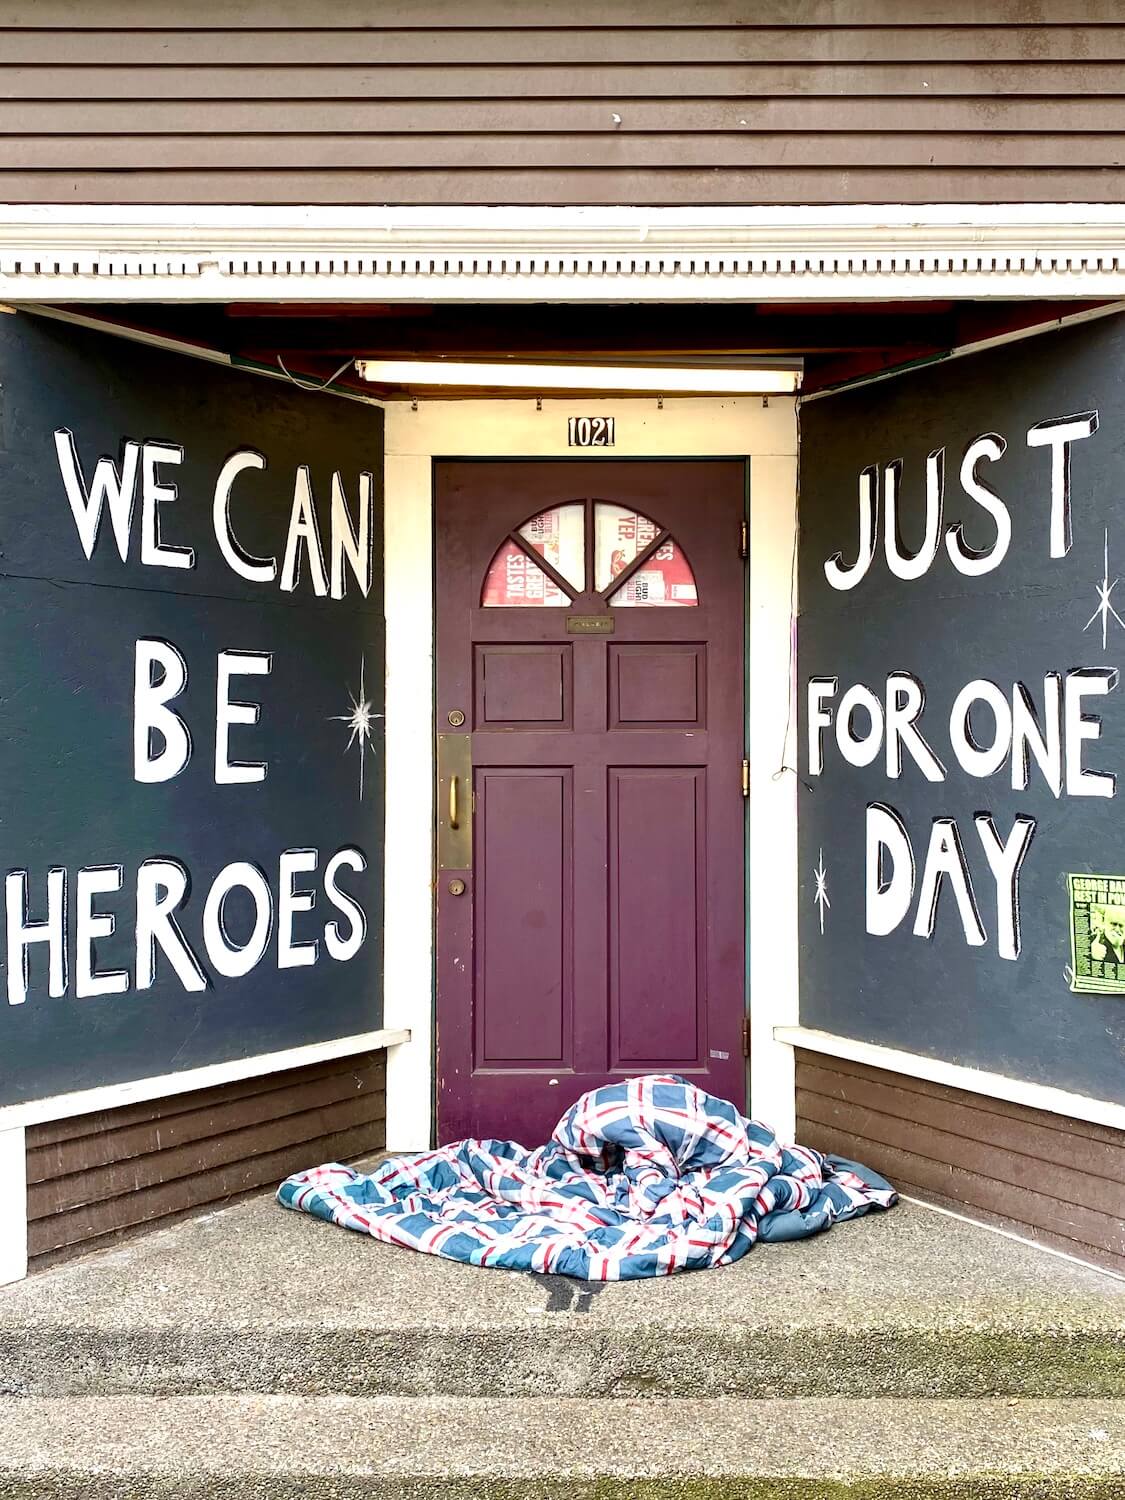 This shot shows a blanket on a doorstep of a building with street art that says, "We can be heroes just for one day."